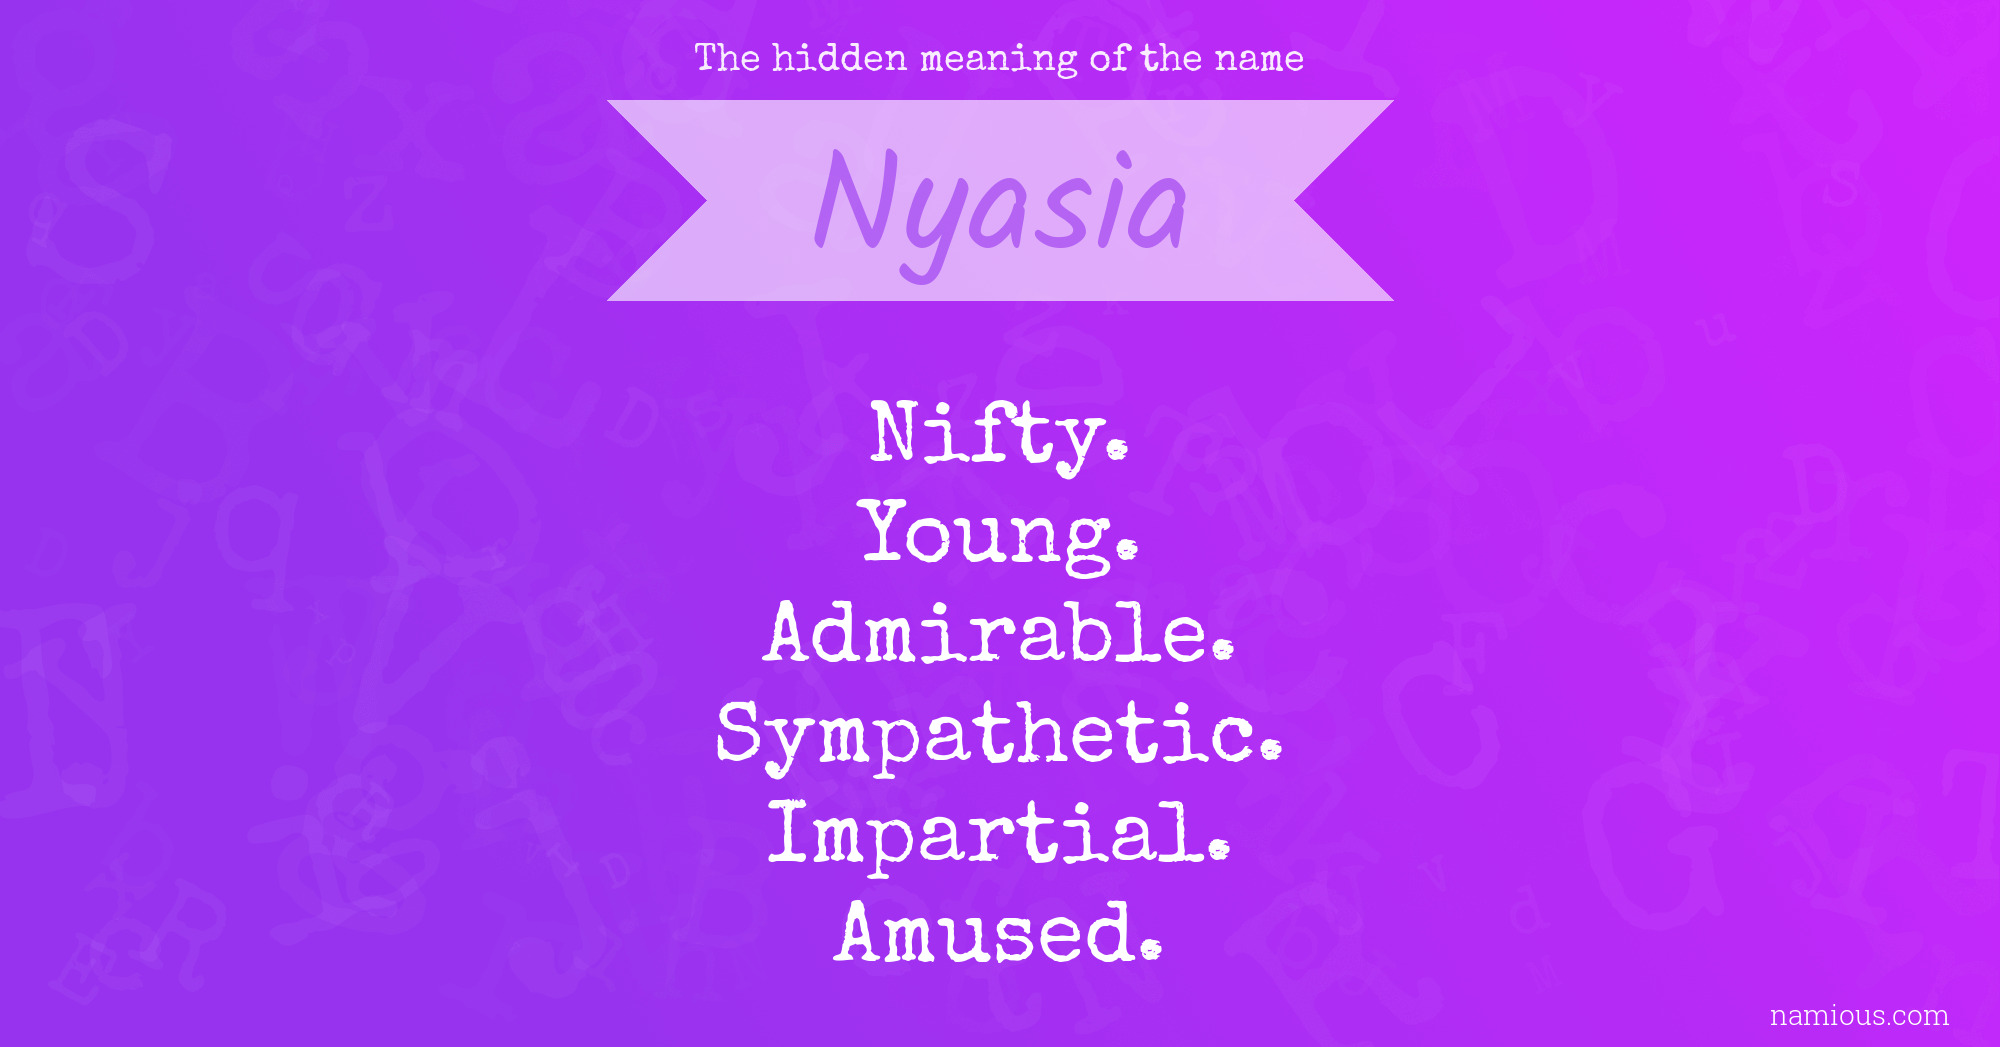 The hidden meaning of the name Nyasia